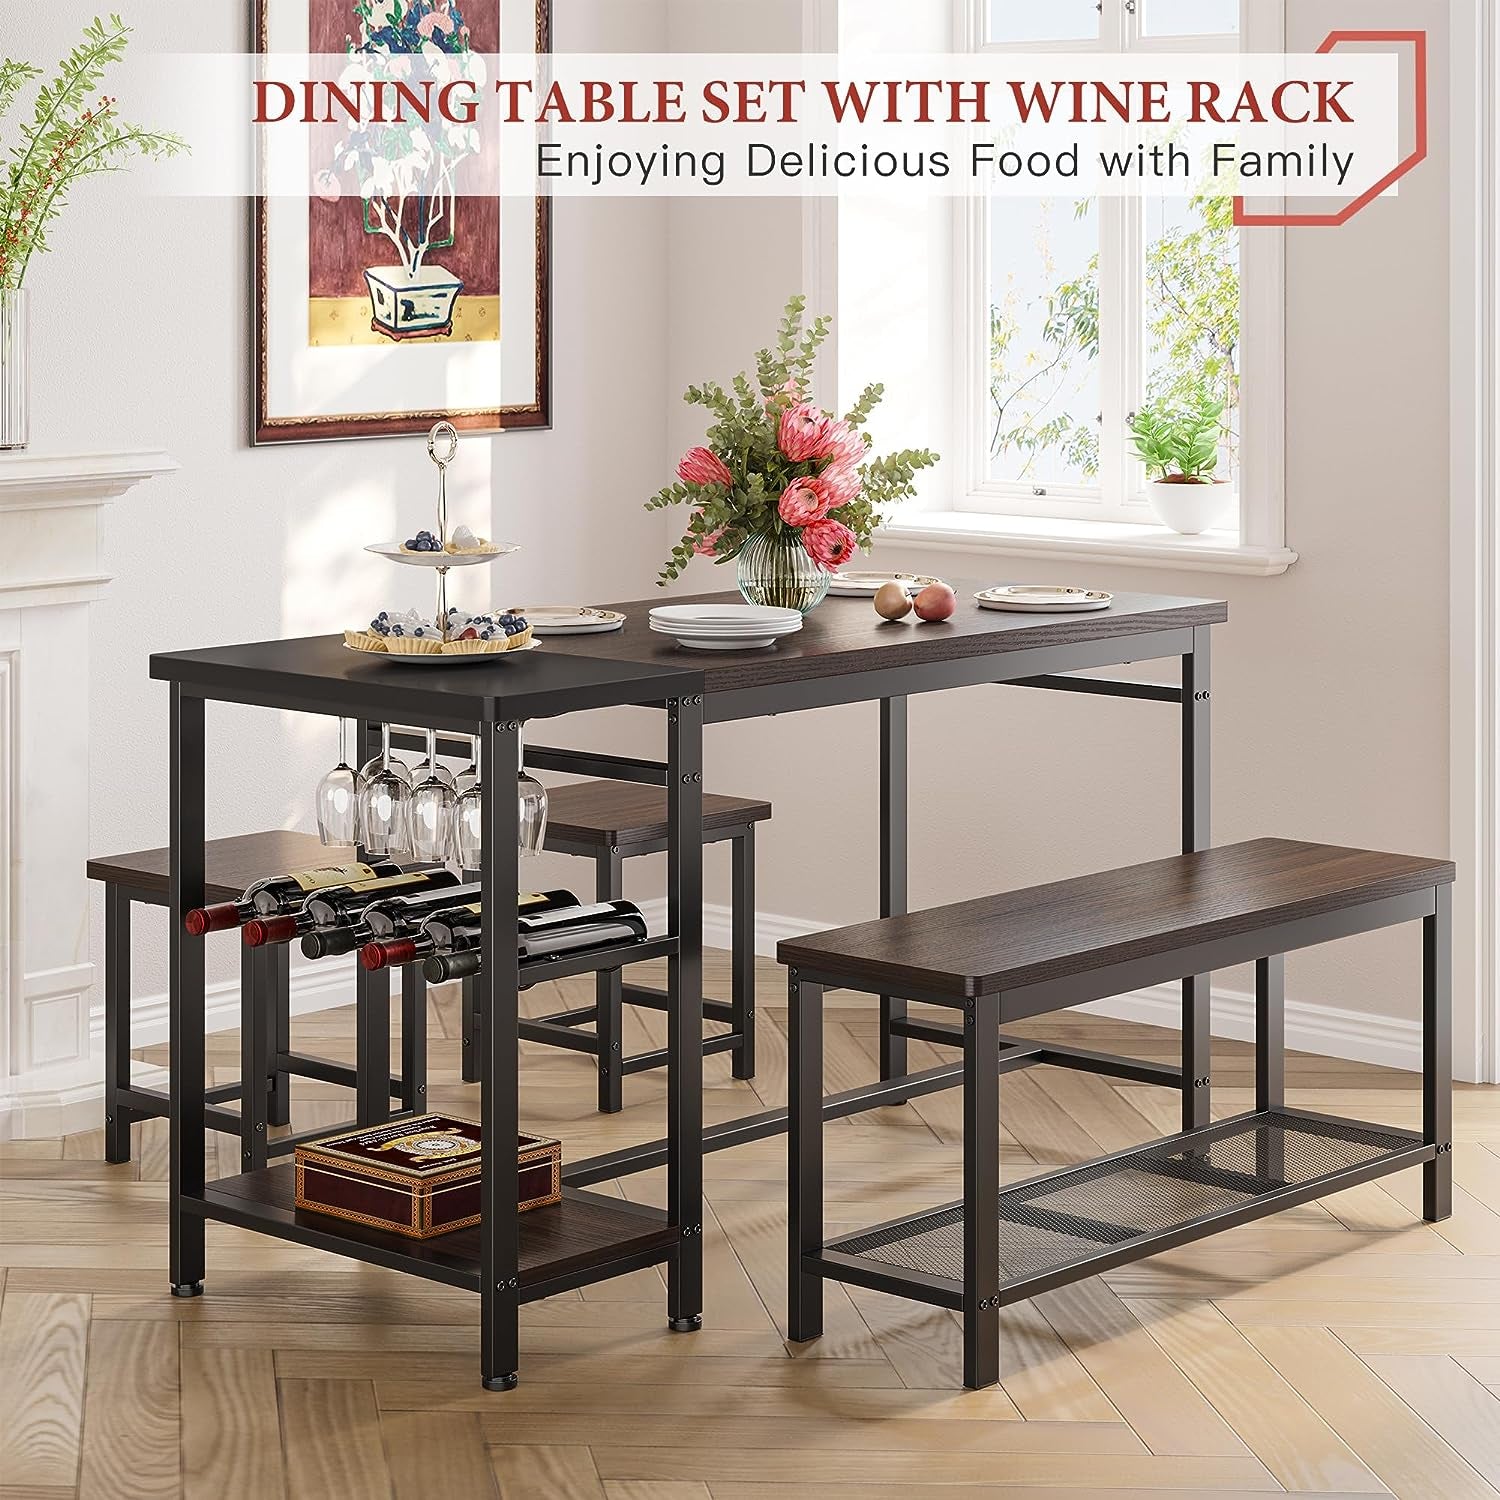 Dining Table Set for 4, Kitchen Table Set 4 Piece Dining Room Table Set with Wine Rack and Storage Shelf, Space-Saving Dinette Set for Small Space,Breakfast Nook, Espresso Brown